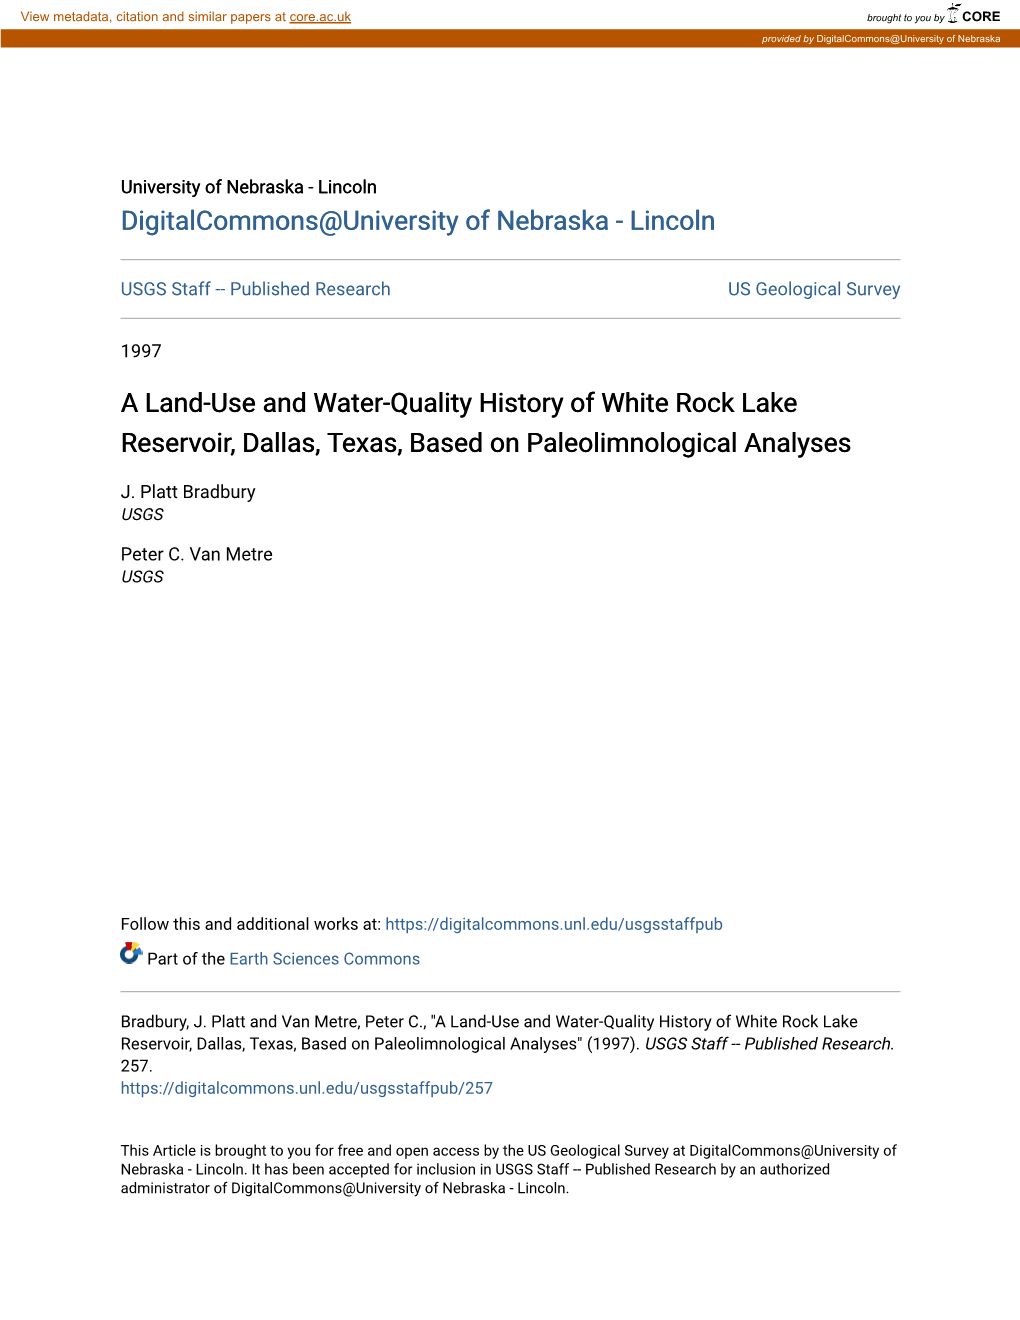 A Land-Use and Water-Quality History of White Rock Lake Reservoir, Dallas, Texas, Based on Paleolimnological Analyses